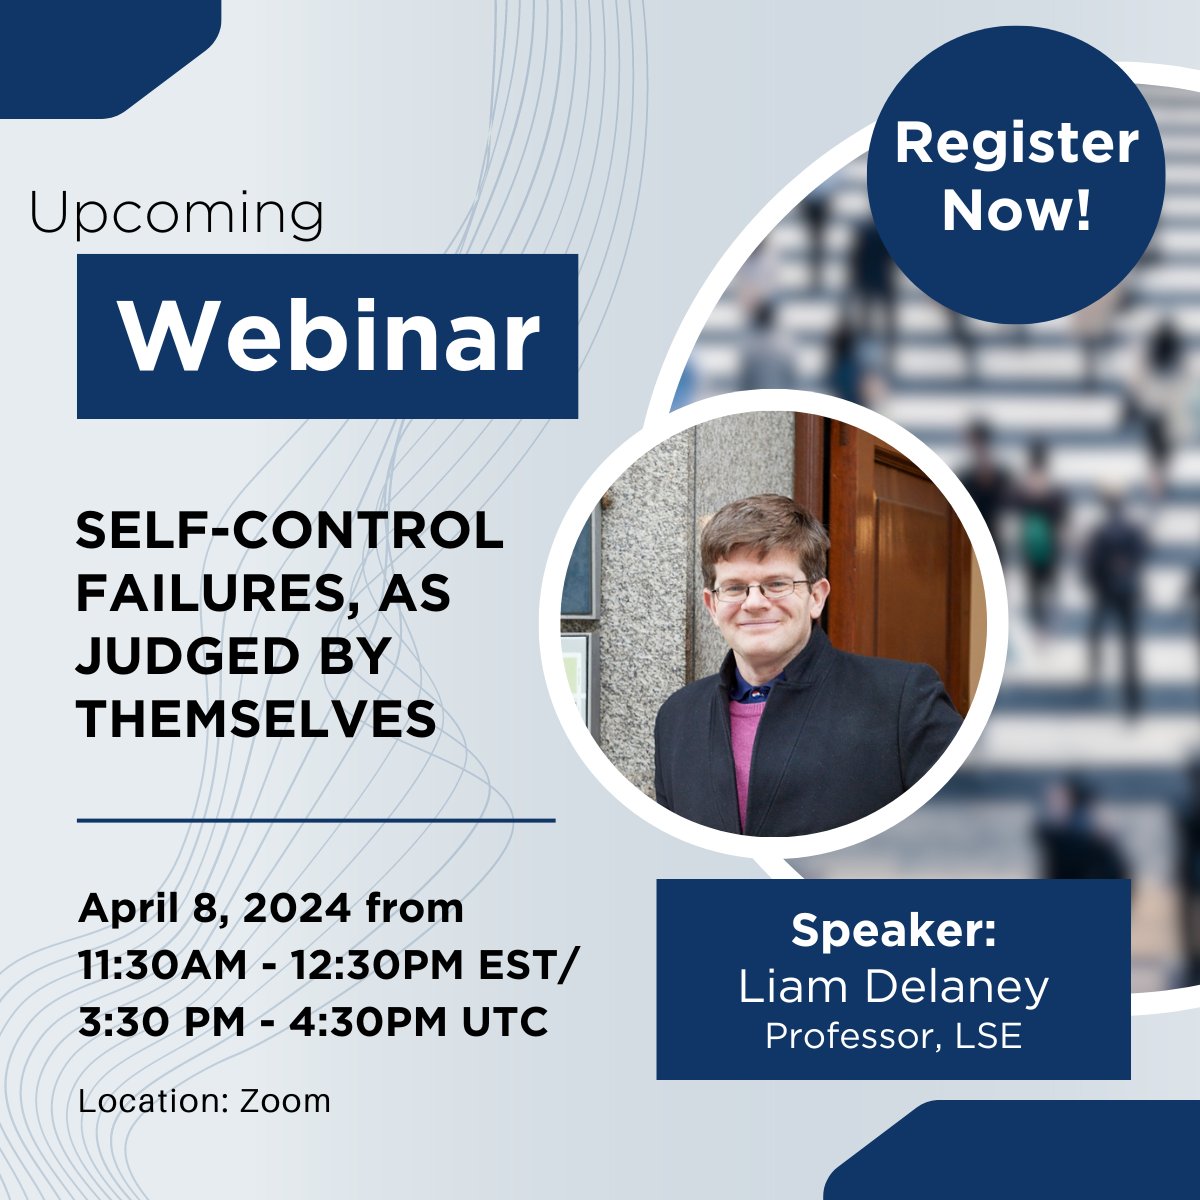 Join us for an insightful webinar on 'Self-Control Failures, As Judged By Themselves' with speaker Liam Delaney, Professor, LSE. Explore the impact on public policy and well-being on April 8th at 11:30 AM-12:30 PM EDT / 3:30 PM-4:30PM UTC. Register now: healtheconomics.org/event/economic…